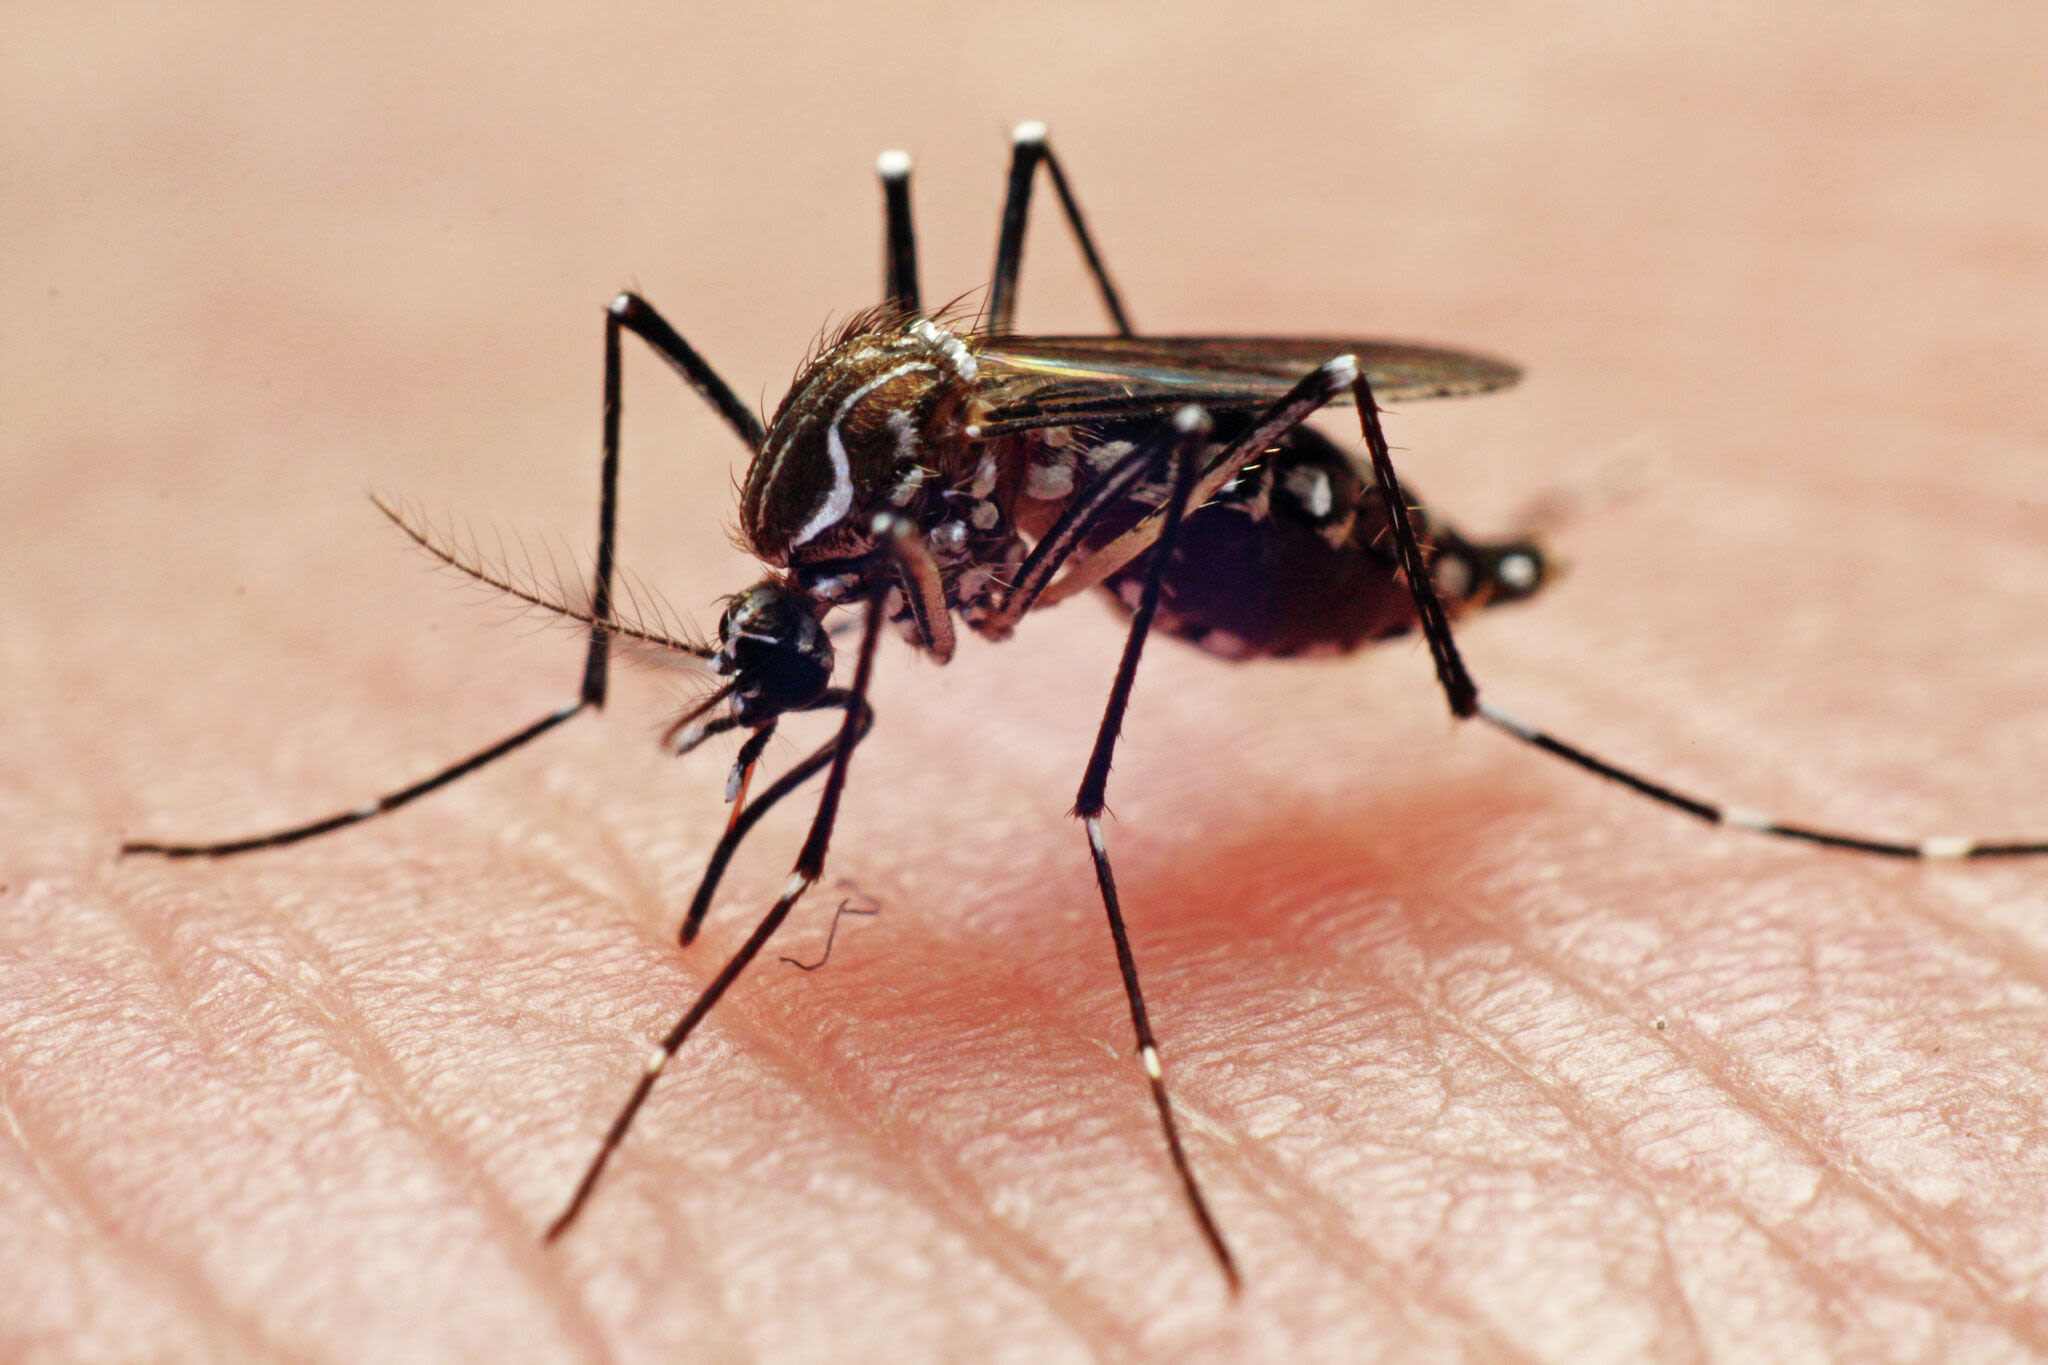 Southwest Side mosquito pool tests positive for West Nile Virus